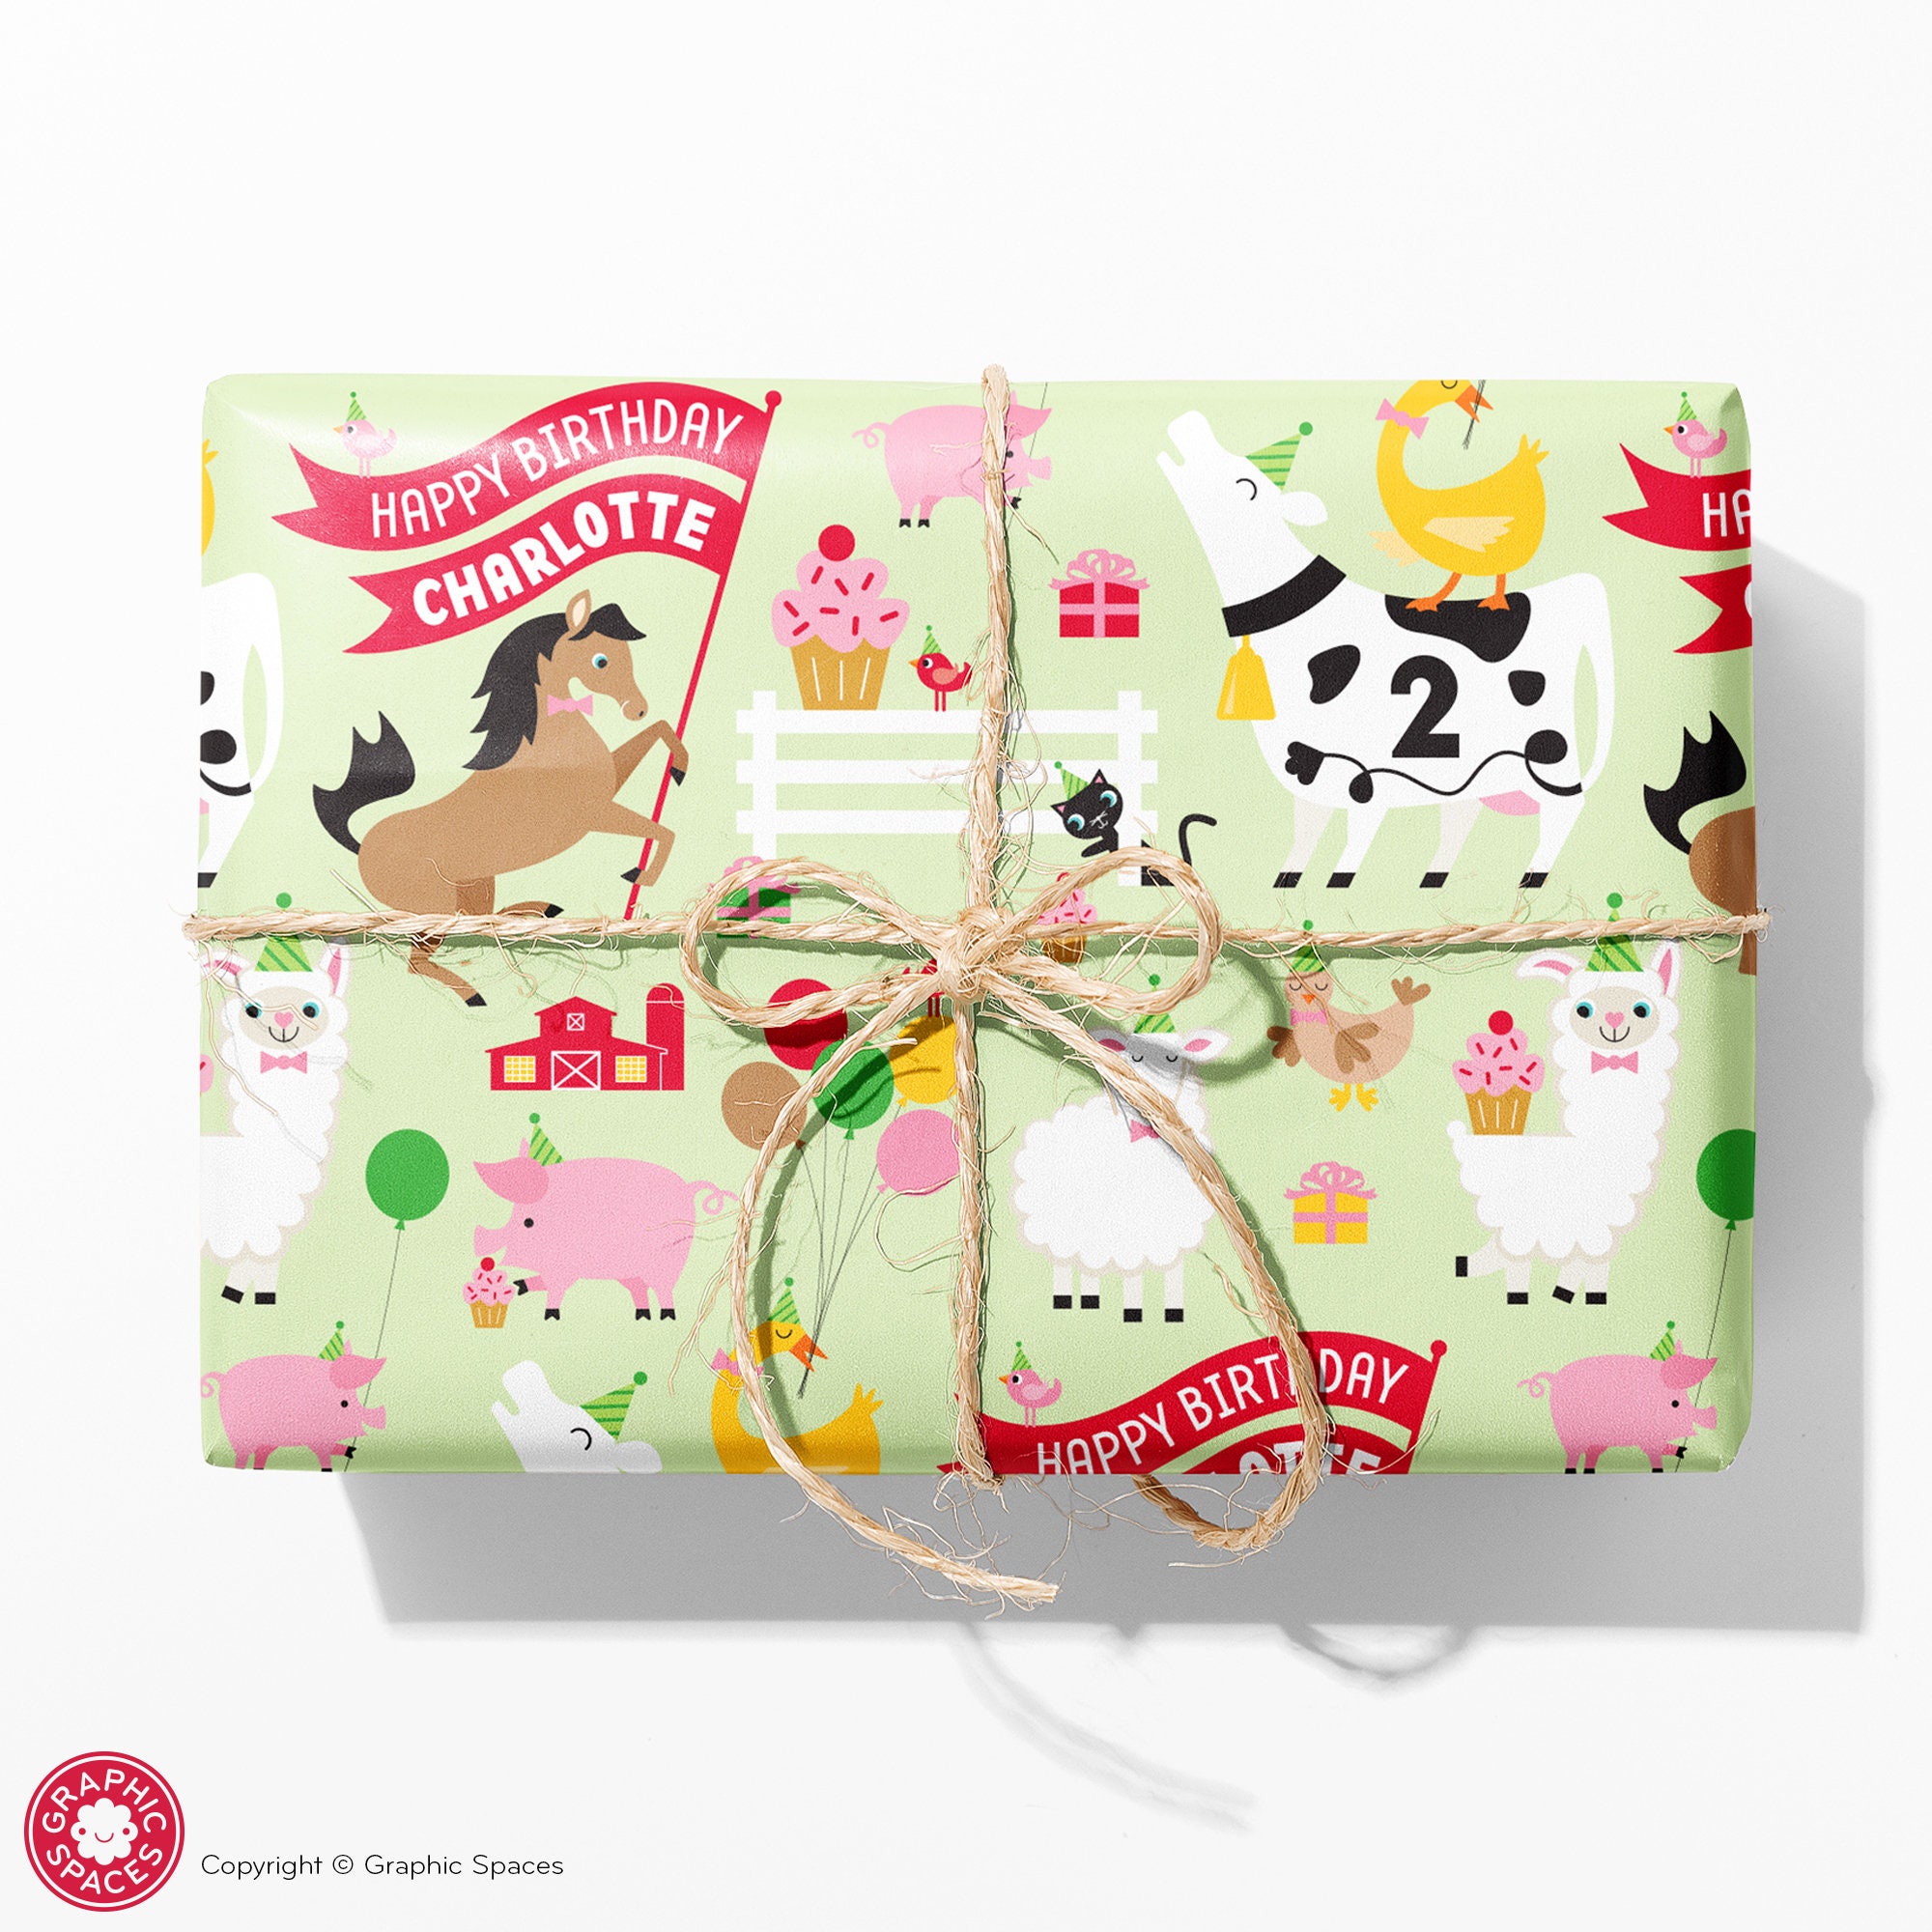 Penguin Ice Skating Christmas Wrapping Paper - Personalized Kids